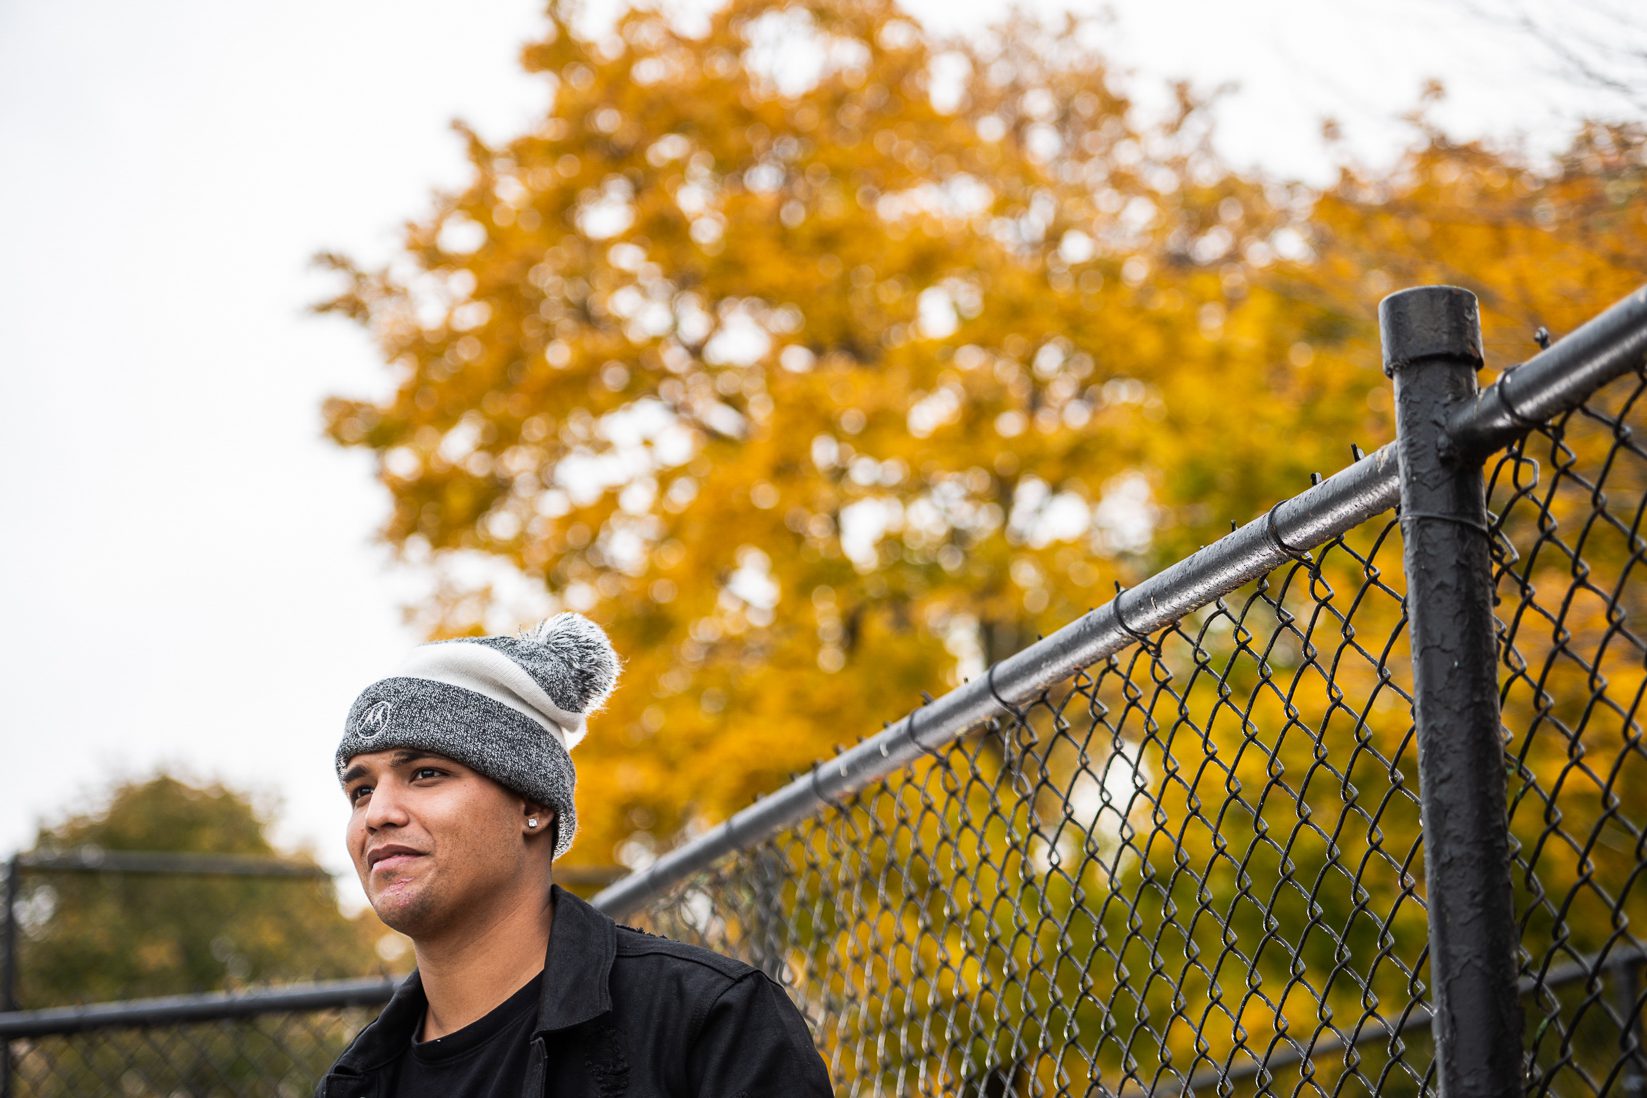 Nolram wears a gray and white beanie with a black shirt and jacket and black fence behind him and behind that yellow fall leaves